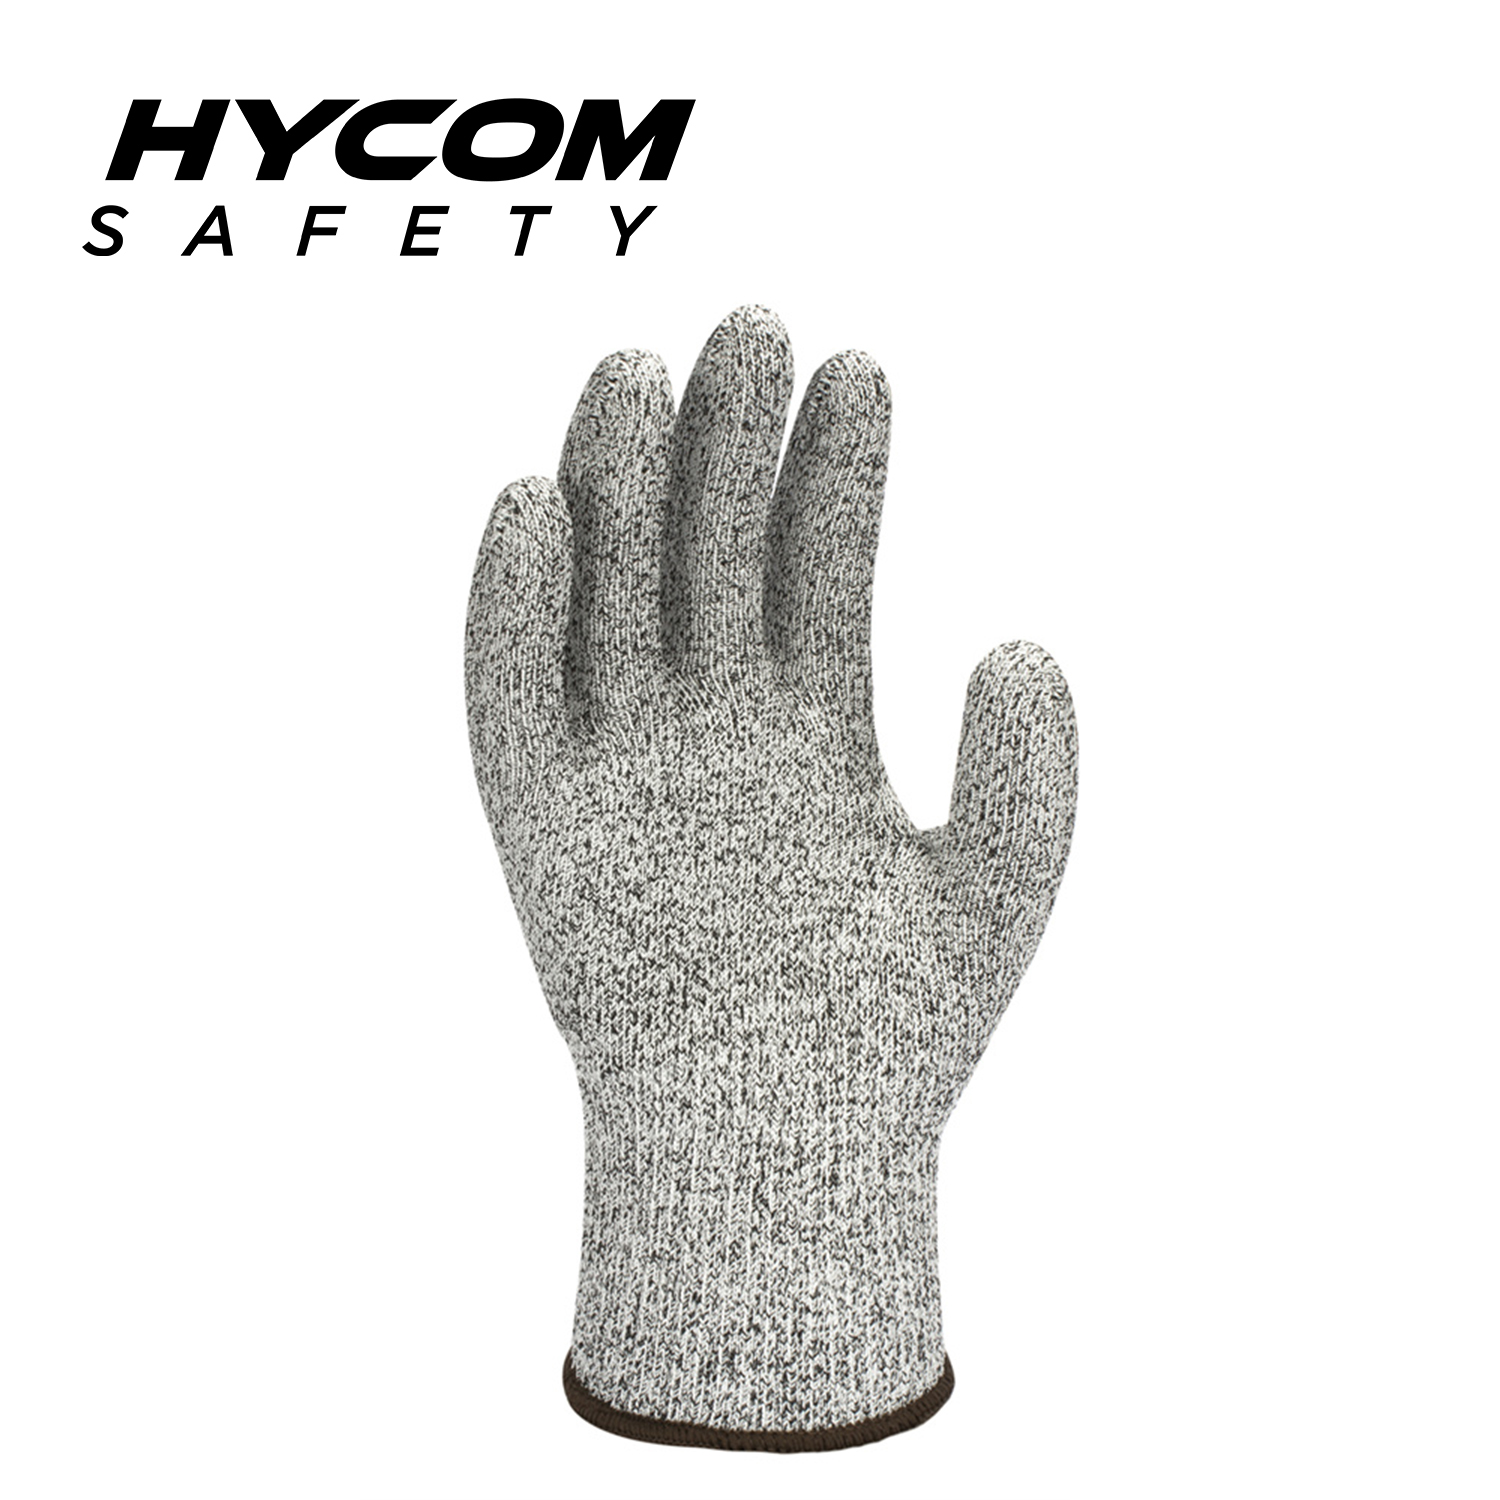 HYCOM 13G Level 5 Cut Resistant Glove FDA Food Contact Directly Anti Cut Gloves